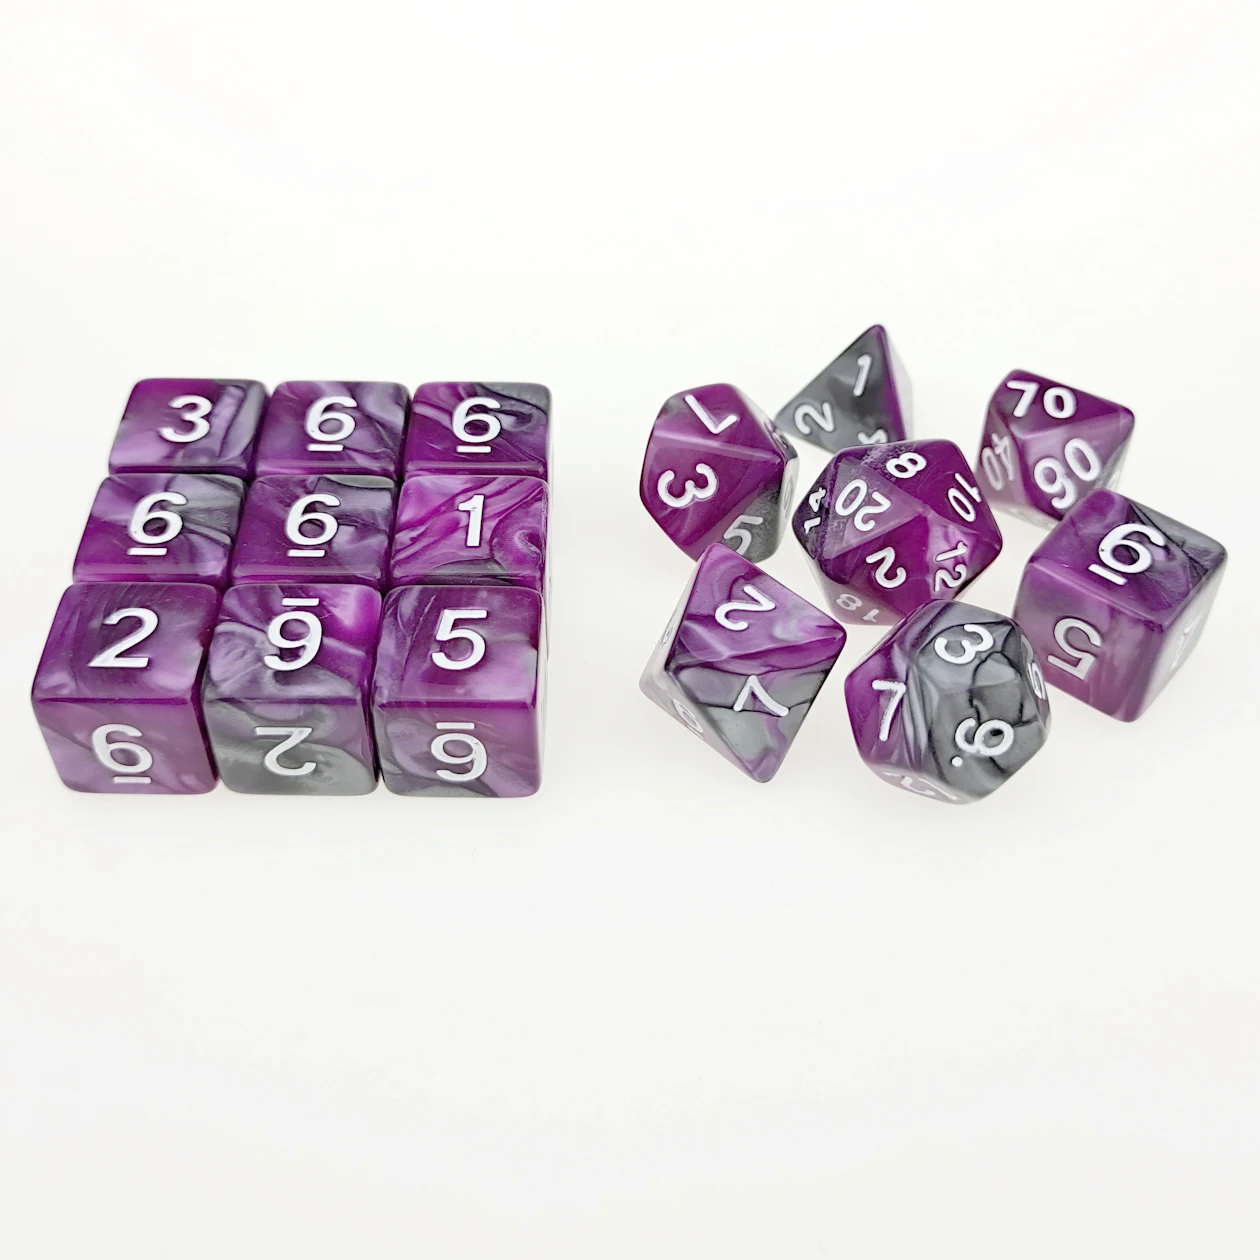 

Rollooo Two-Tone Particular Roleplaying Dice Set Standard 7 + 9 Extra D6s for RPG D&D Games